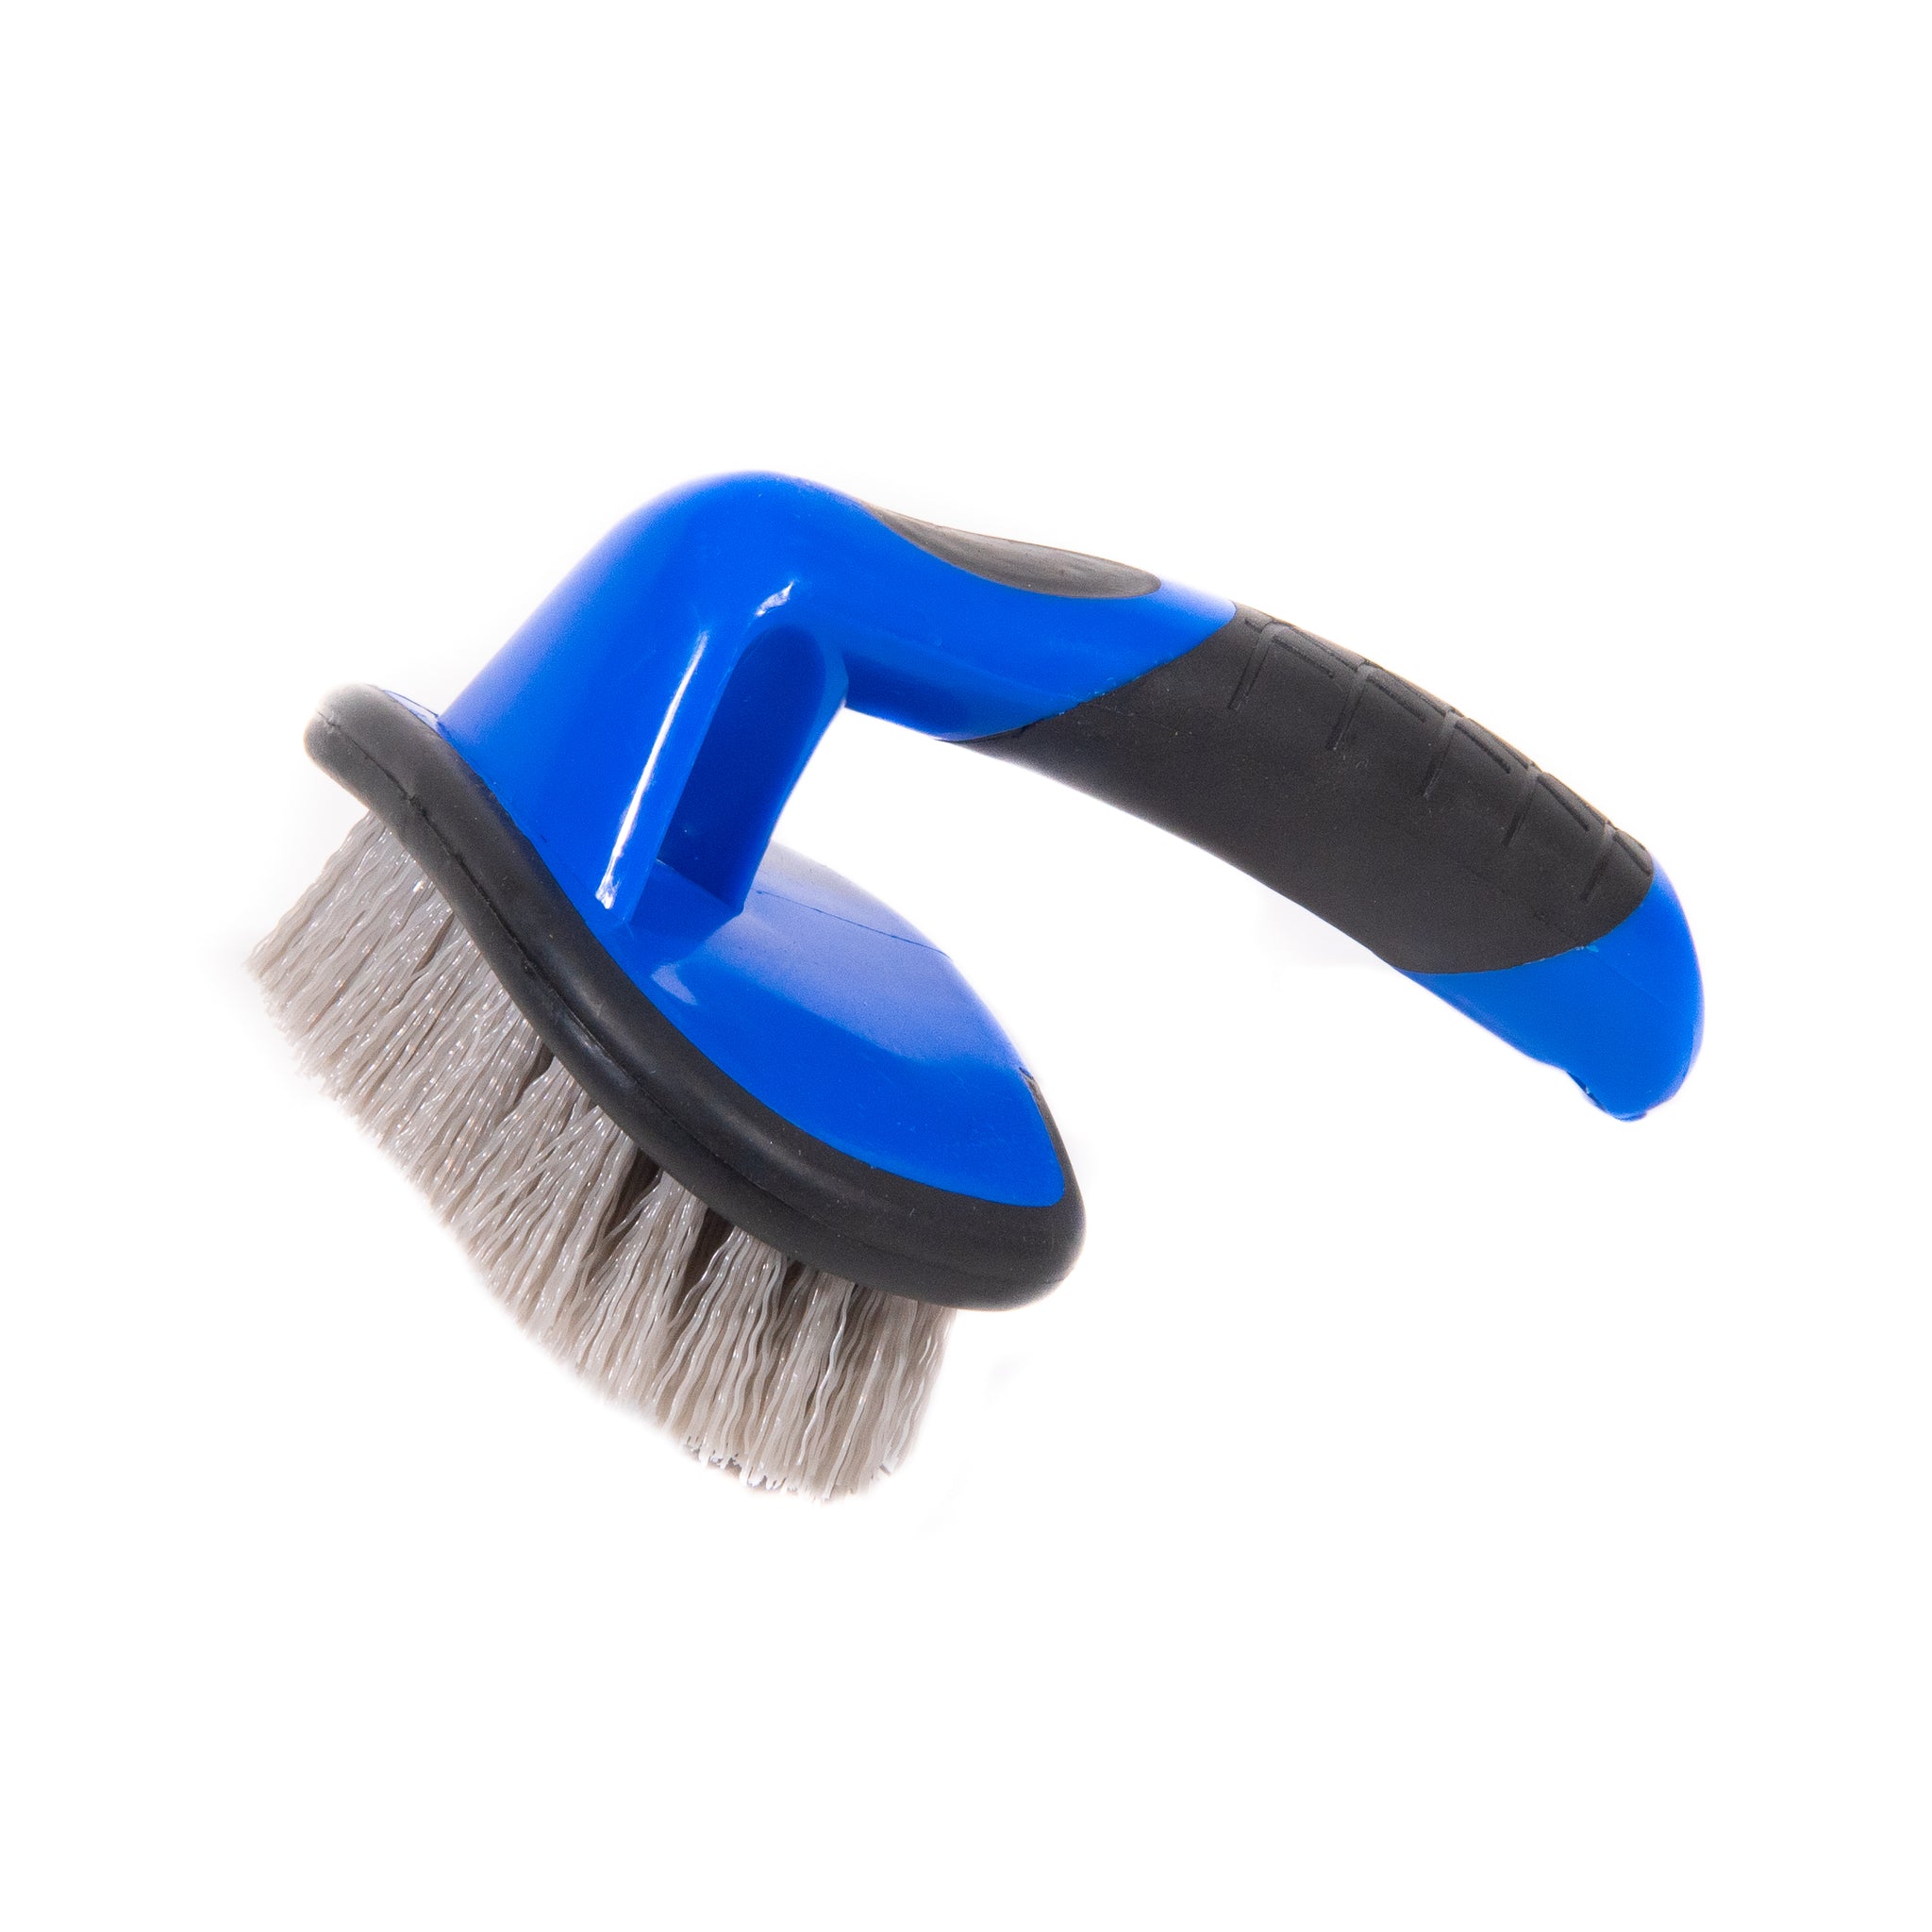 Carrand Deluxe Super Soft Car Wash Brush